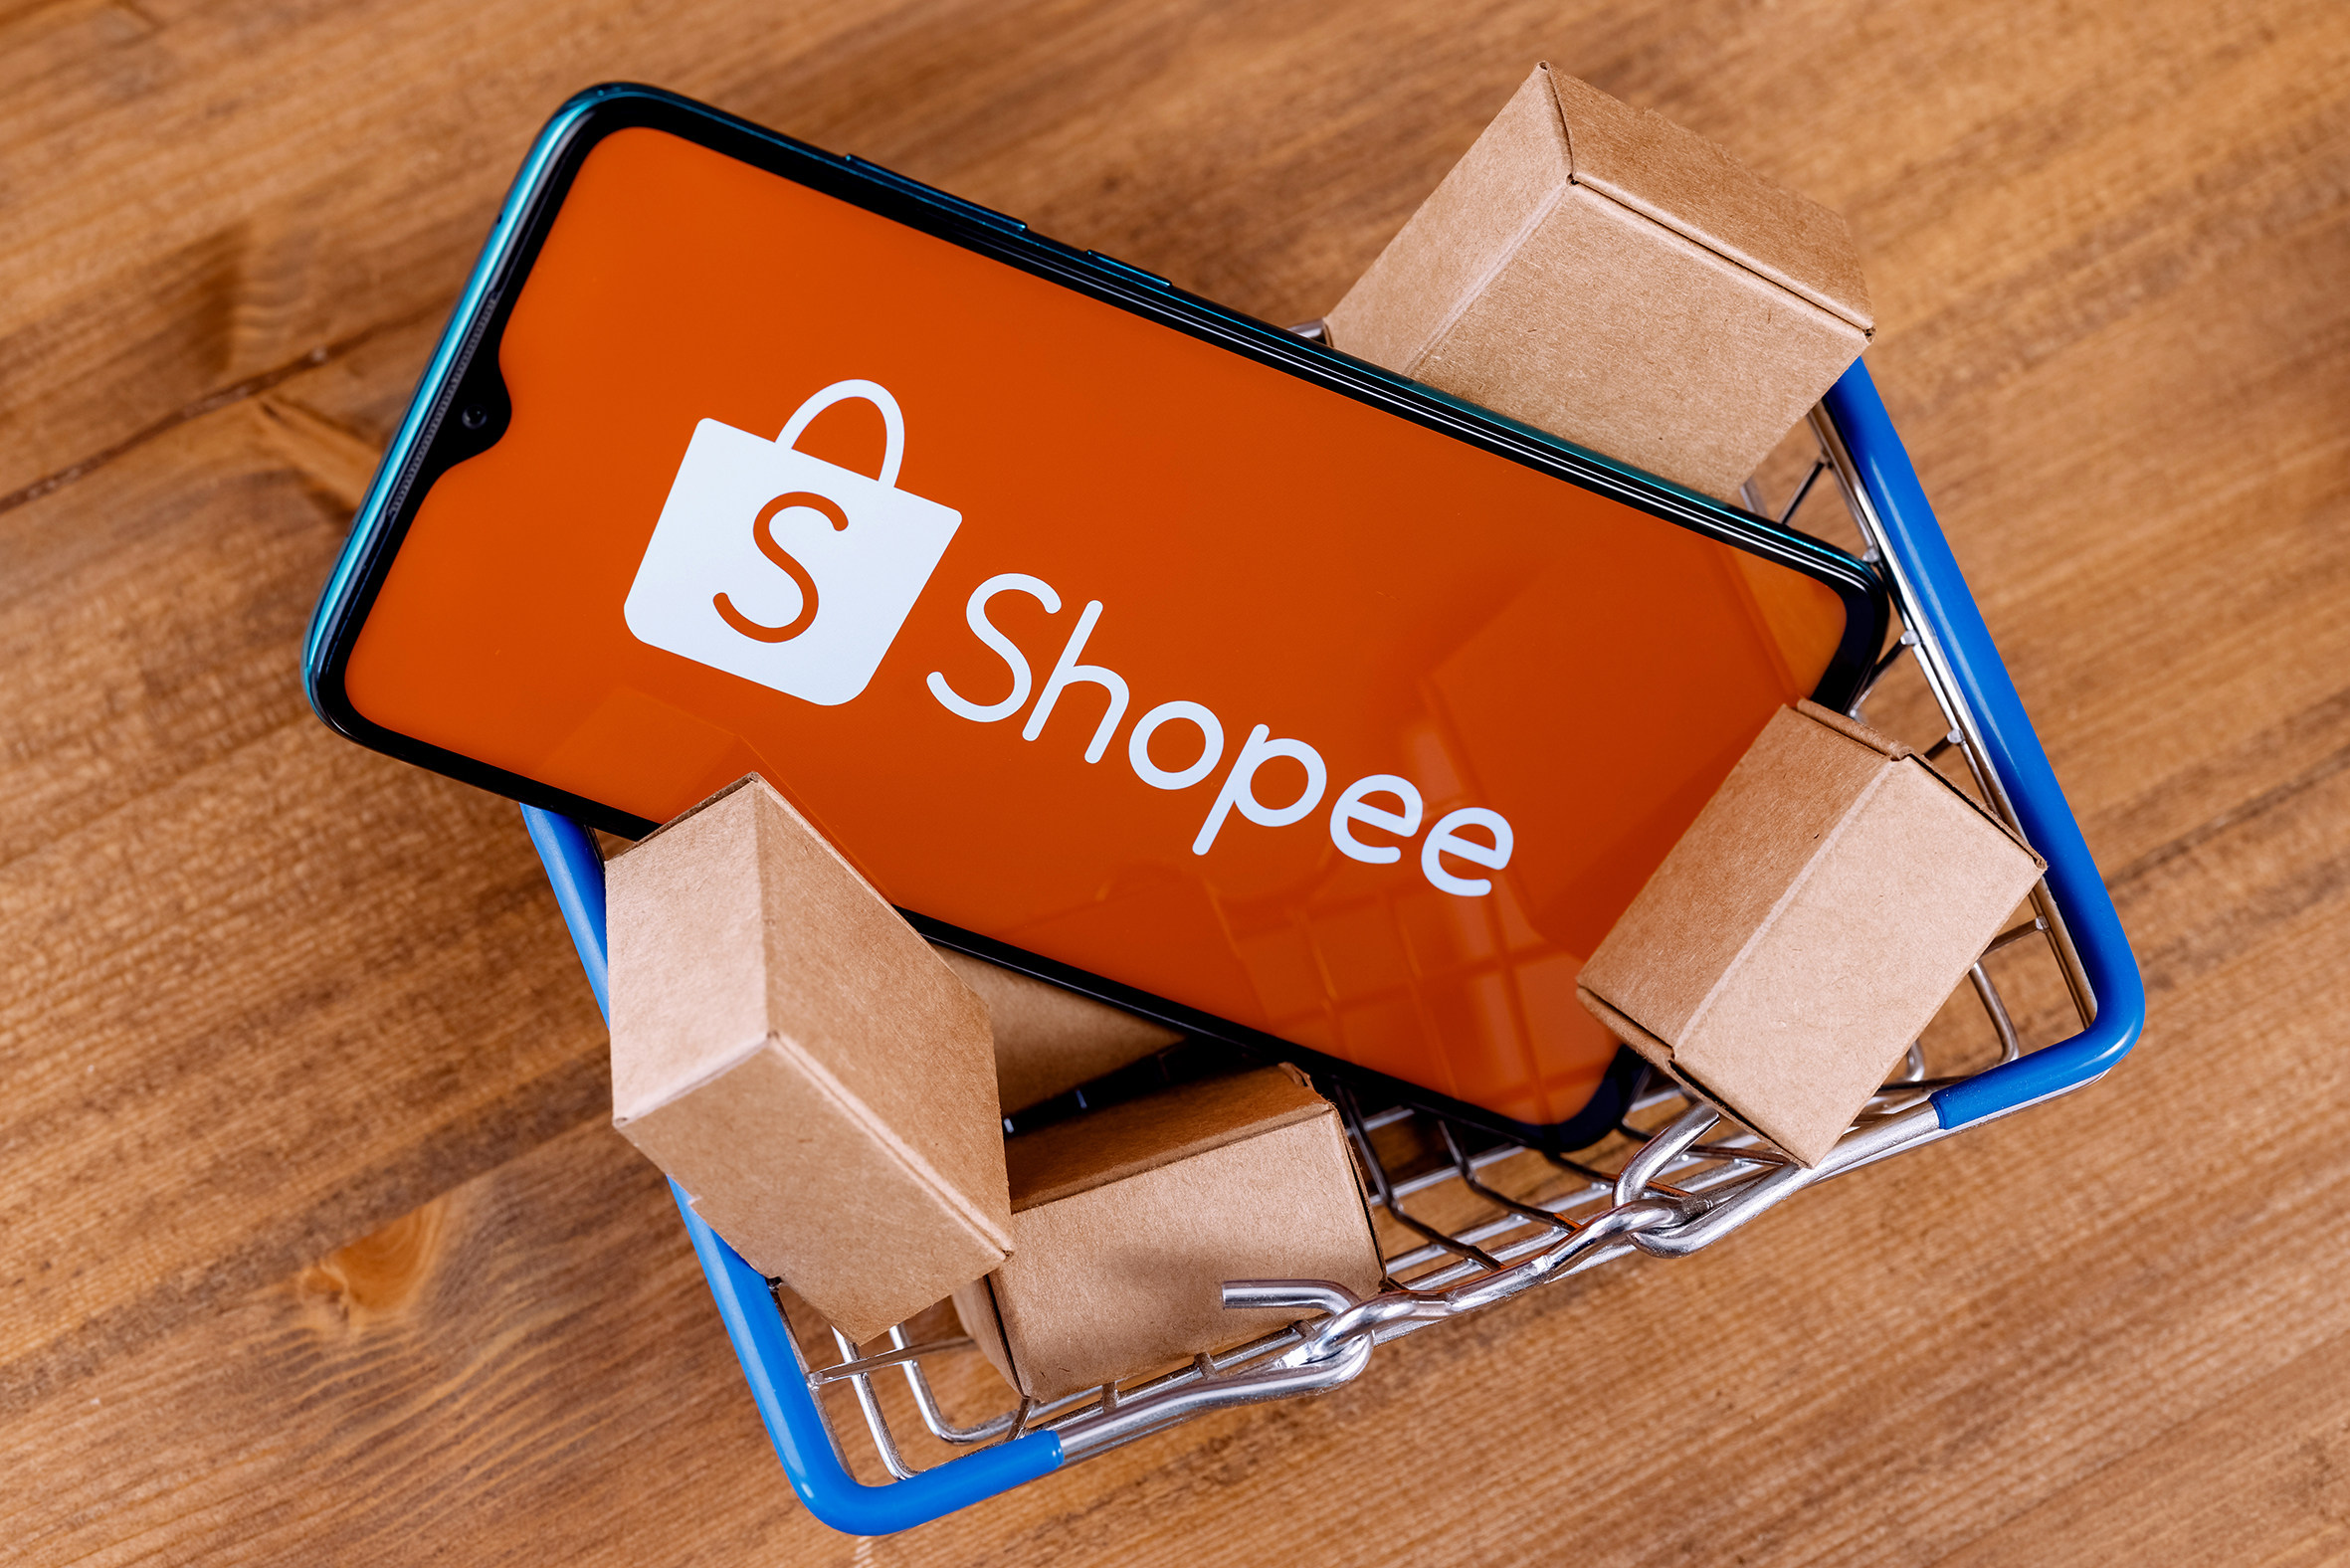 Shopee: A Perspective From Indonesia (NYSE:SE)